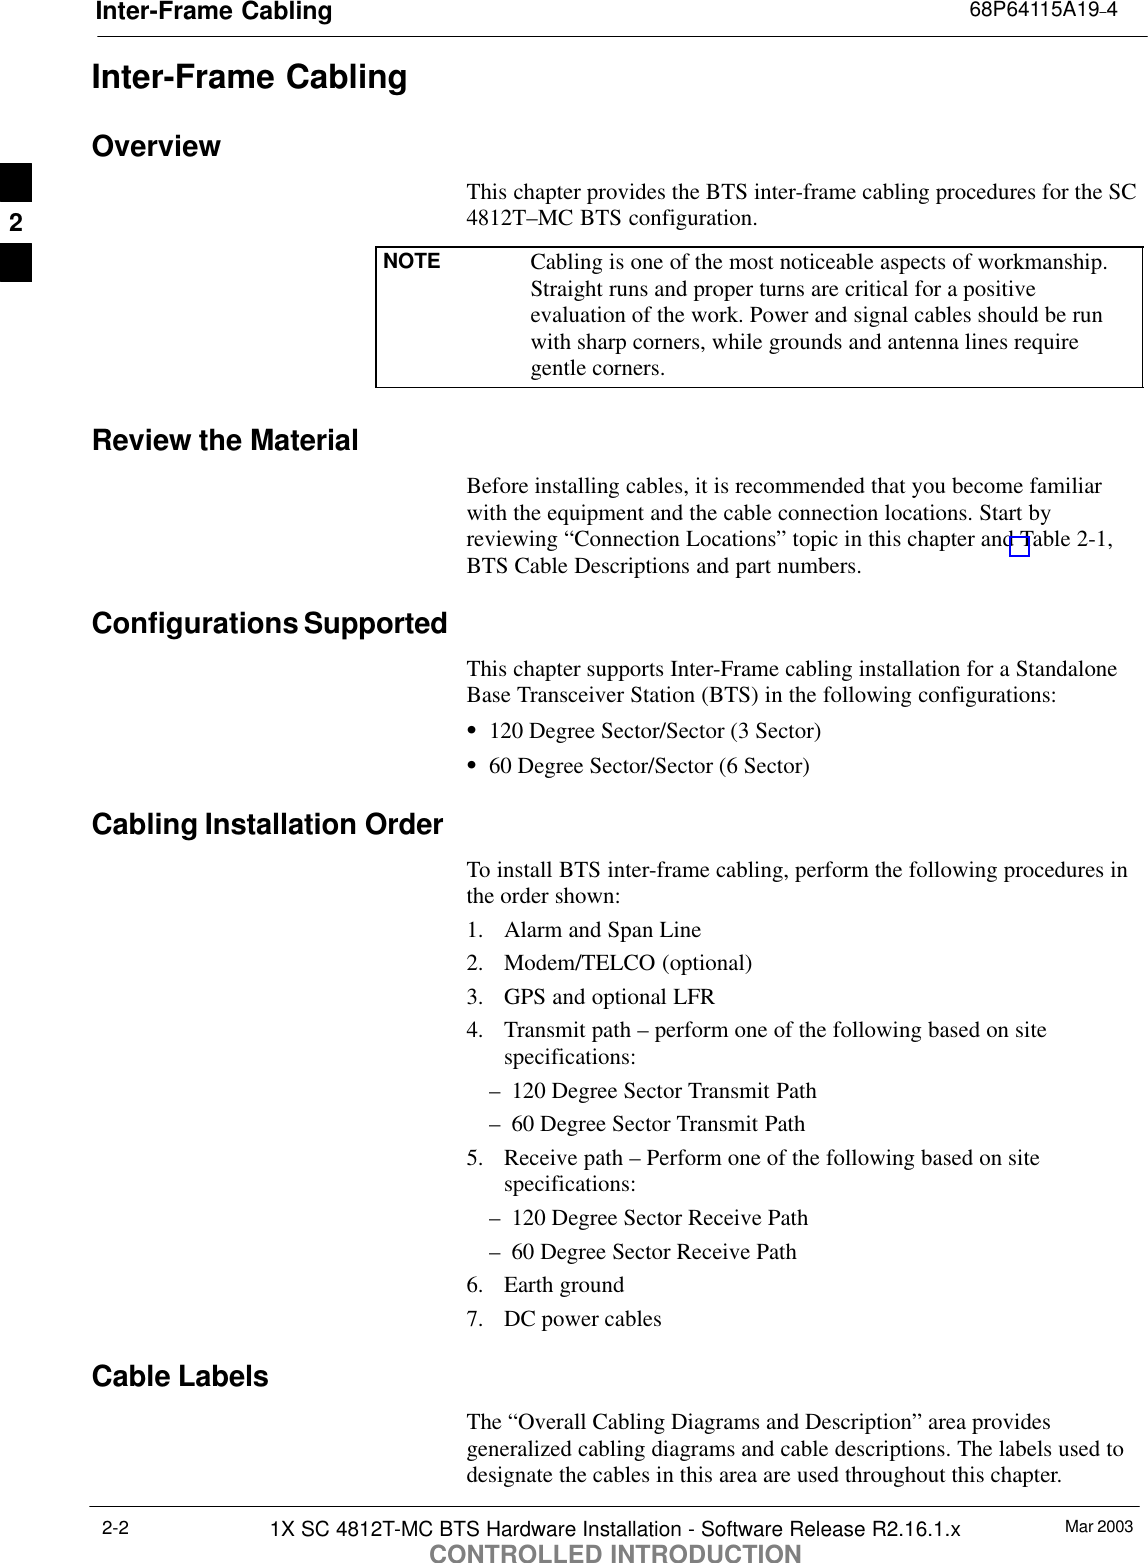 Inter-Frame Cabling 68P64115A19–4Mar 20031X SC 4812T-MC BTS Hardware Installation - Software Release R2.16.1.xCONTROLLED INTRODUCTION2-2Inter-Frame CablingOverviewThis chapter provides the BTS inter-frame cabling procedures for the SC4812T–MC BTS configuration.NOTE Cabling is one of the most noticeable aspects of workmanship.Straight runs and proper turns are critical for a positiveevaluation of the work. Power and signal cables should be runwith sharp corners, while grounds and antenna lines requiregentle corners.Review the MaterialBefore installing cables, it is recommended that you become familiarwith the equipment and the cable connection locations. Start byreviewing “Connection Locations” topic in this chapter and Table 2-1,BTS Cable Descriptions and part numbers.Configurations SupportedThis chapter supports Inter-Frame cabling installation for a StandaloneBase Transceiver Station (BTS) in the following configurations:S120 Degree Sector/Sector (3 Sector)S60 Degree Sector/Sector (6 Sector)Cabling Installation OrderTo install BTS inter-frame cabling, perform the following procedures inthe order shown:1. Alarm and Span Line2. Modem/TELCO (optional)3. GPS and optional LFR4. Transmit path – perform one of the following based on sitespecifications:– 120 Degree Sector Transmit Path– 60 Degree Sector Transmit Path5. Receive path – Perform one of the following based on sitespecifications:– 120 Degree Sector Receive Path– 60 Degree Sector Receive Path6. Earth ground7. DC power cablesCable LabelsThe “Overall Cabling Diagrams and Description” area providesgeneralized cabling diagrams and cable descriptions. The labels used todesignate the cables in this area are used throughout this chapter.2